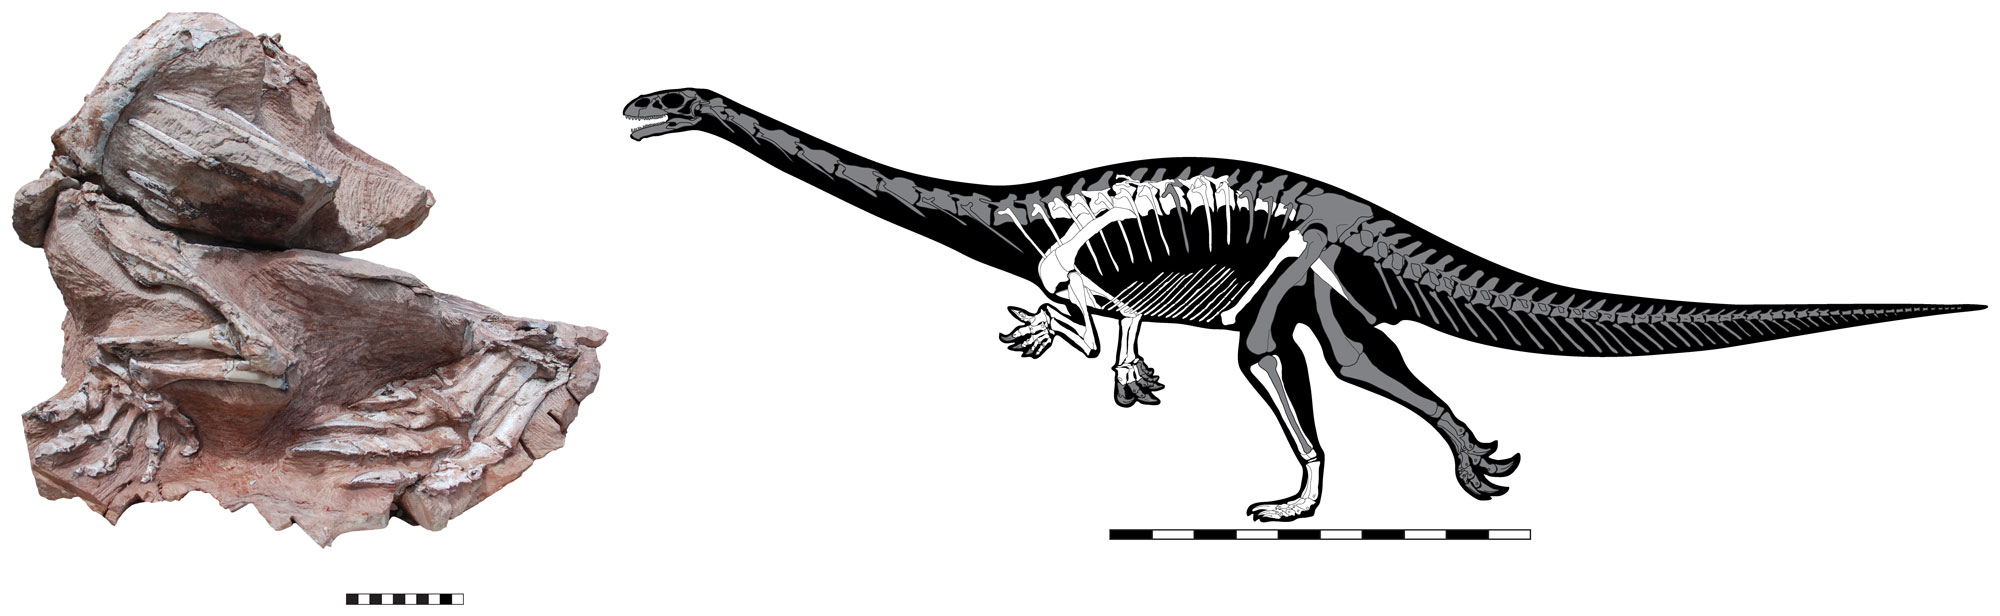 2-panel figure of the Early Jurassic prosauropod Seitaad reussi from New Mexico. Panel 1: Photograph of one side of the fossil specimen of the dinosaur, which clearly shows two feet and part of an arm. Panel 2: Illustration showing a reconstruction of the skeleton in a silhouette of the living dinosaur. The dinosaur is bipedal (walks on two legs) with a long neck, small head, and long tail.